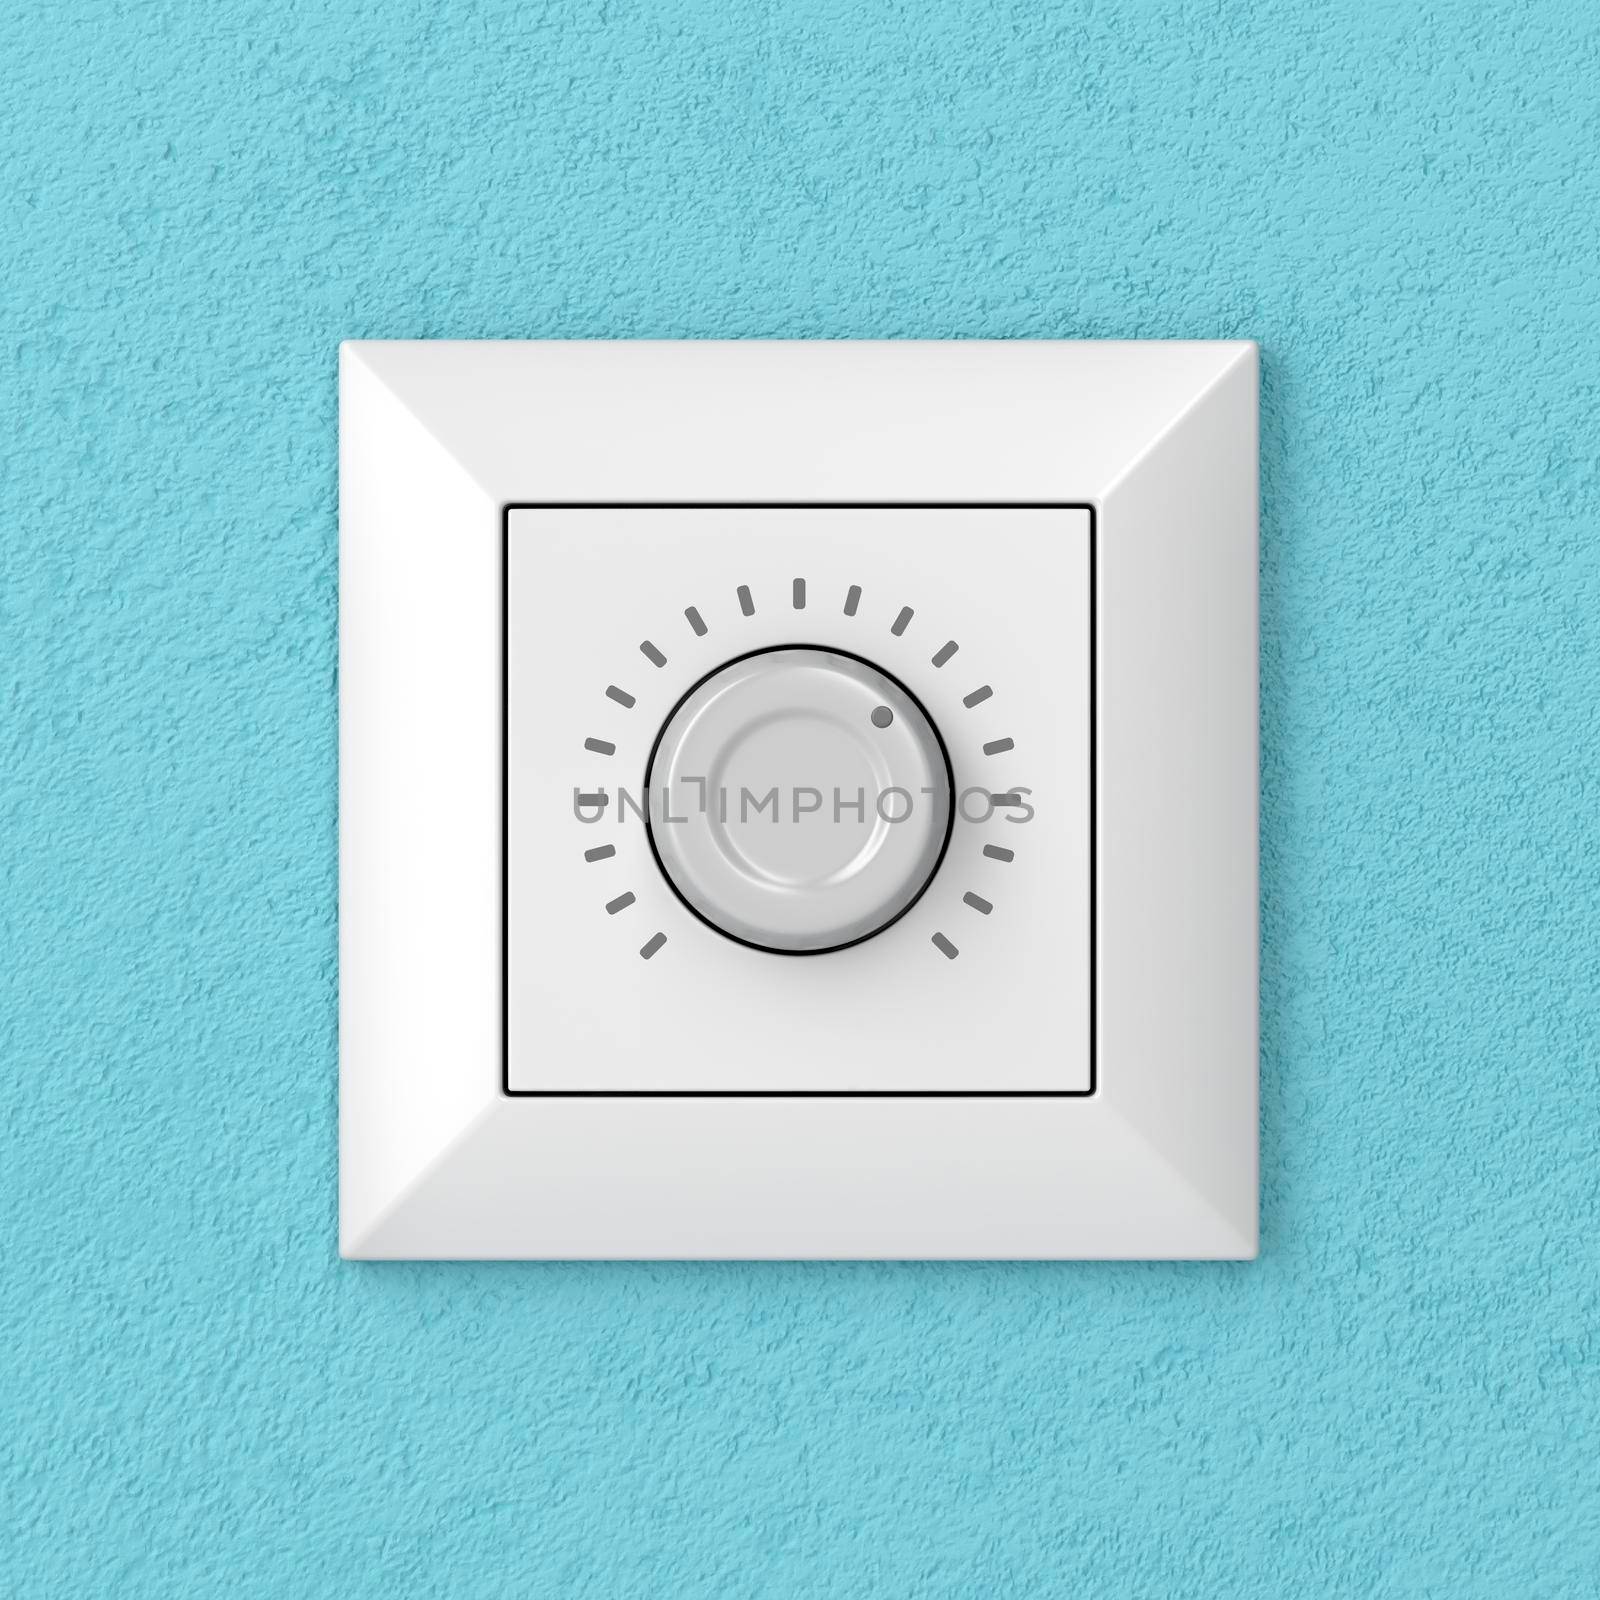 Dimmer light switch on a wall, front view